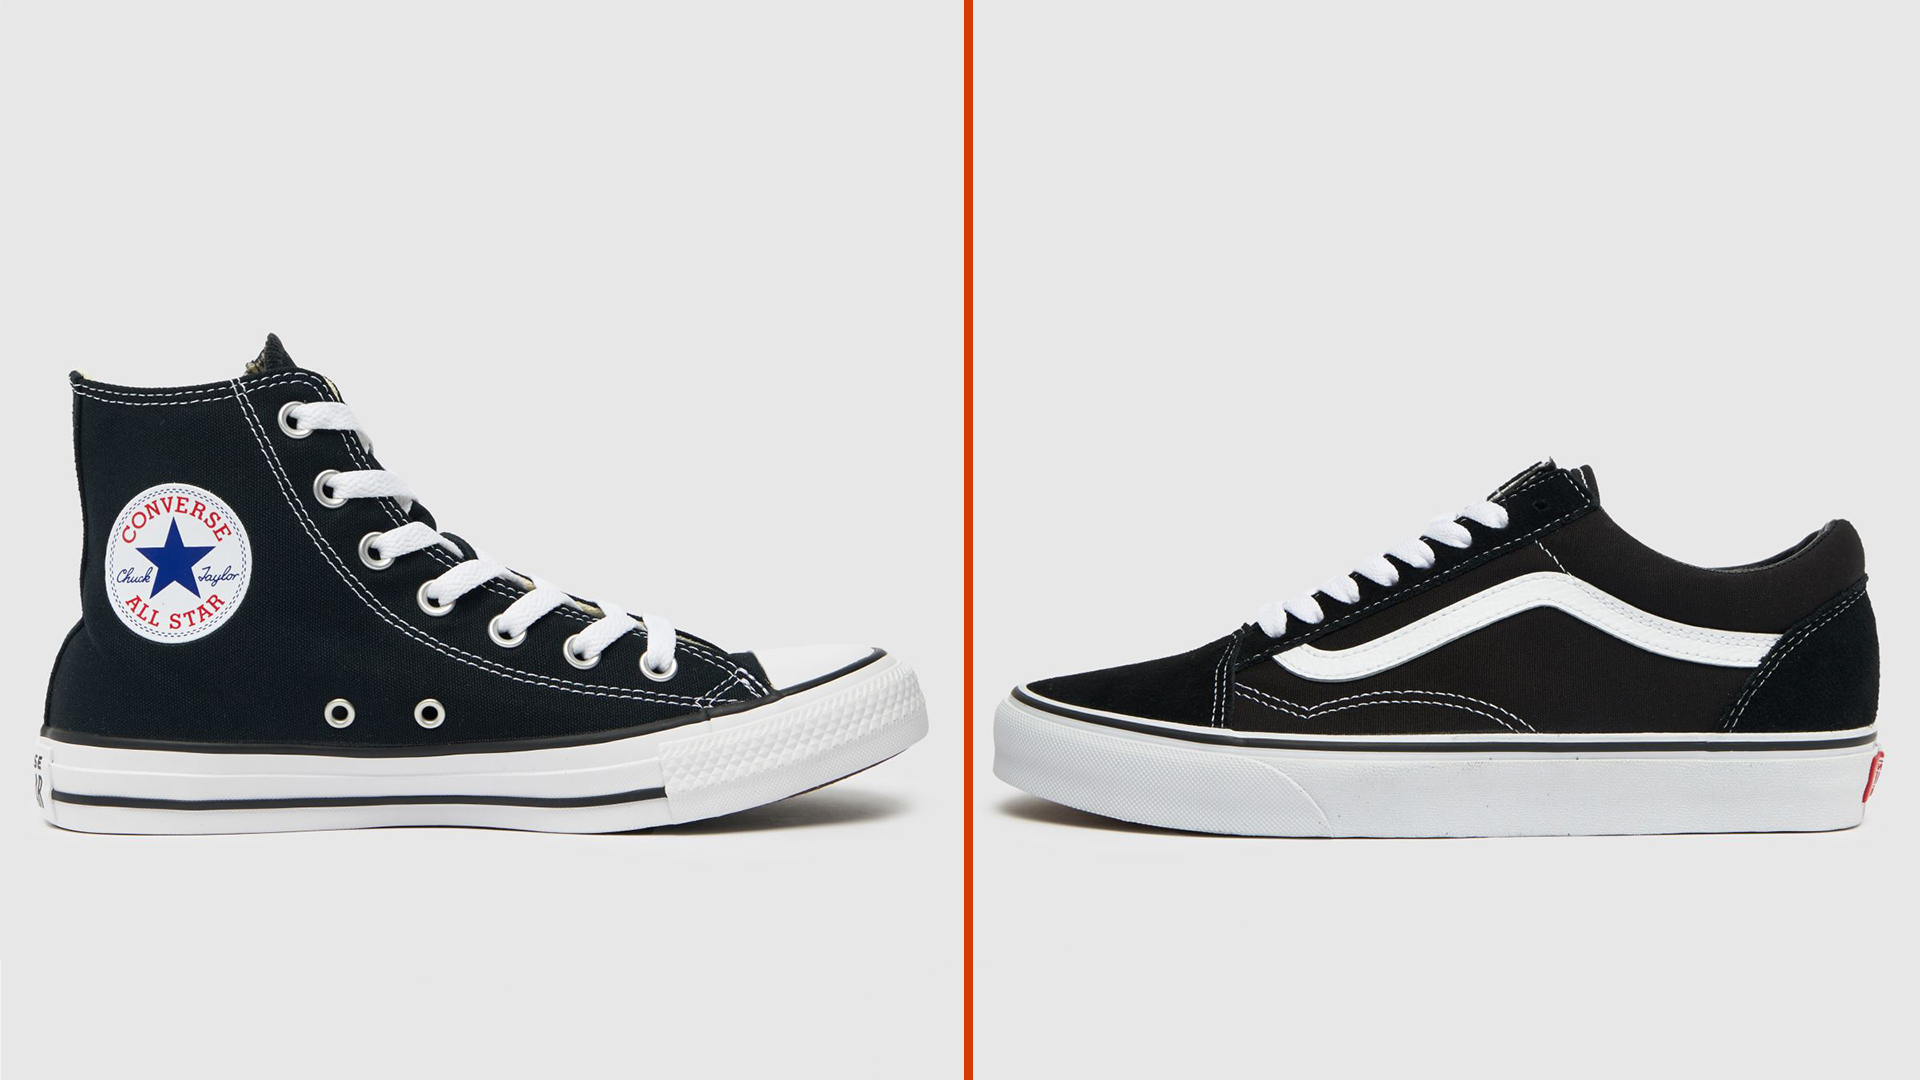 Converse and Vans compete to be Schuh's top selling Christmas shoe -  